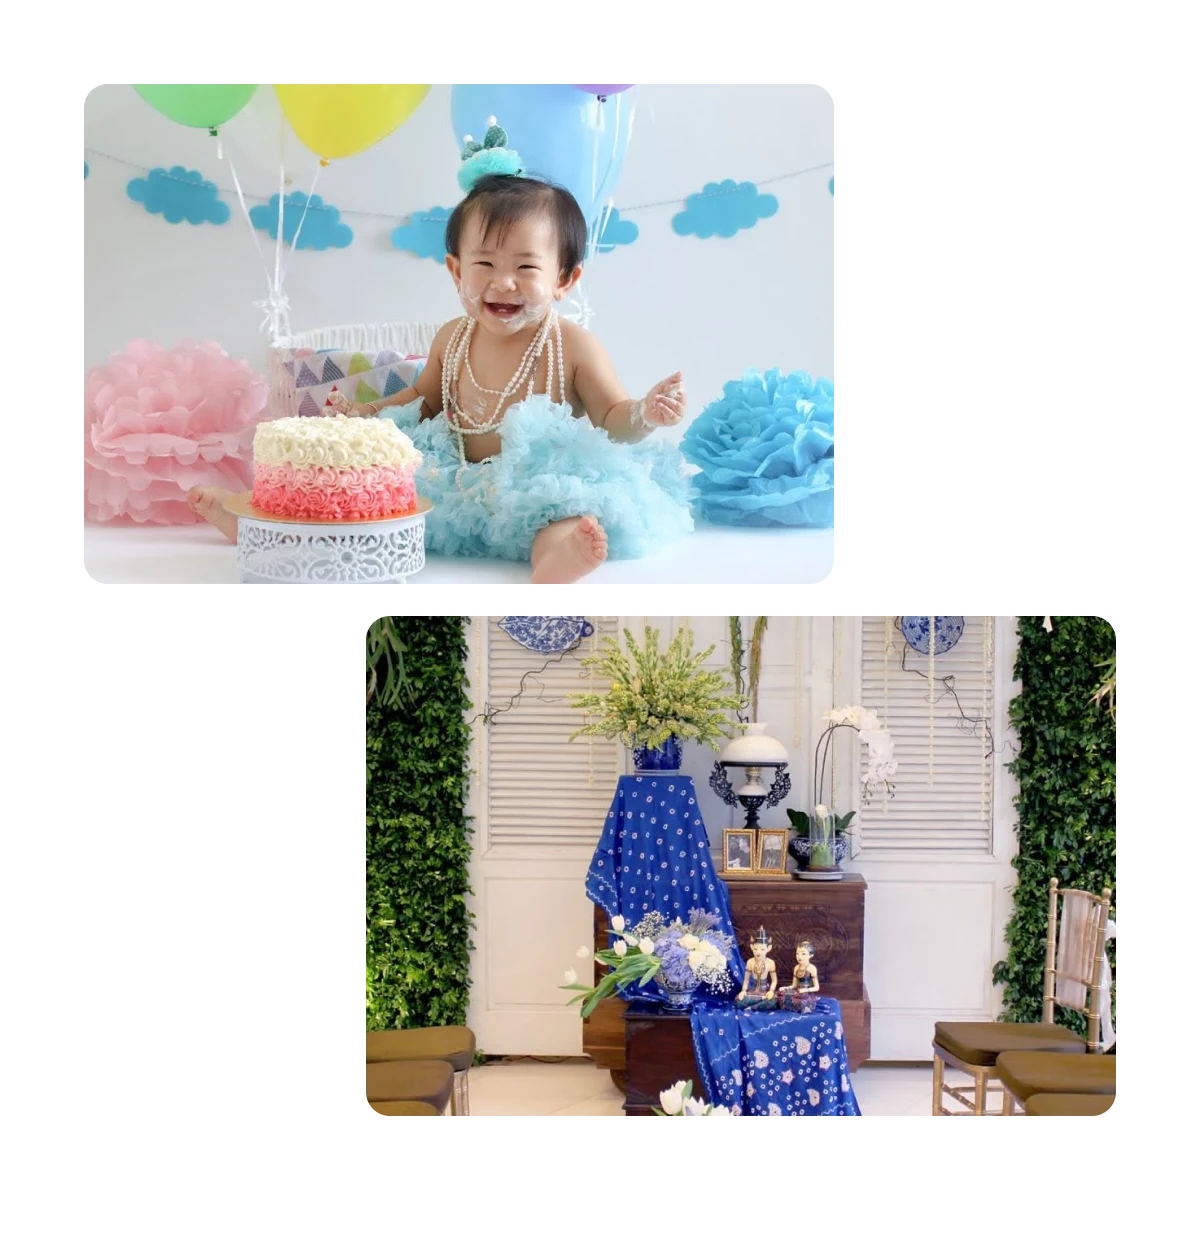 Two pins, toddler with presents cakes and balloons, decorations for party